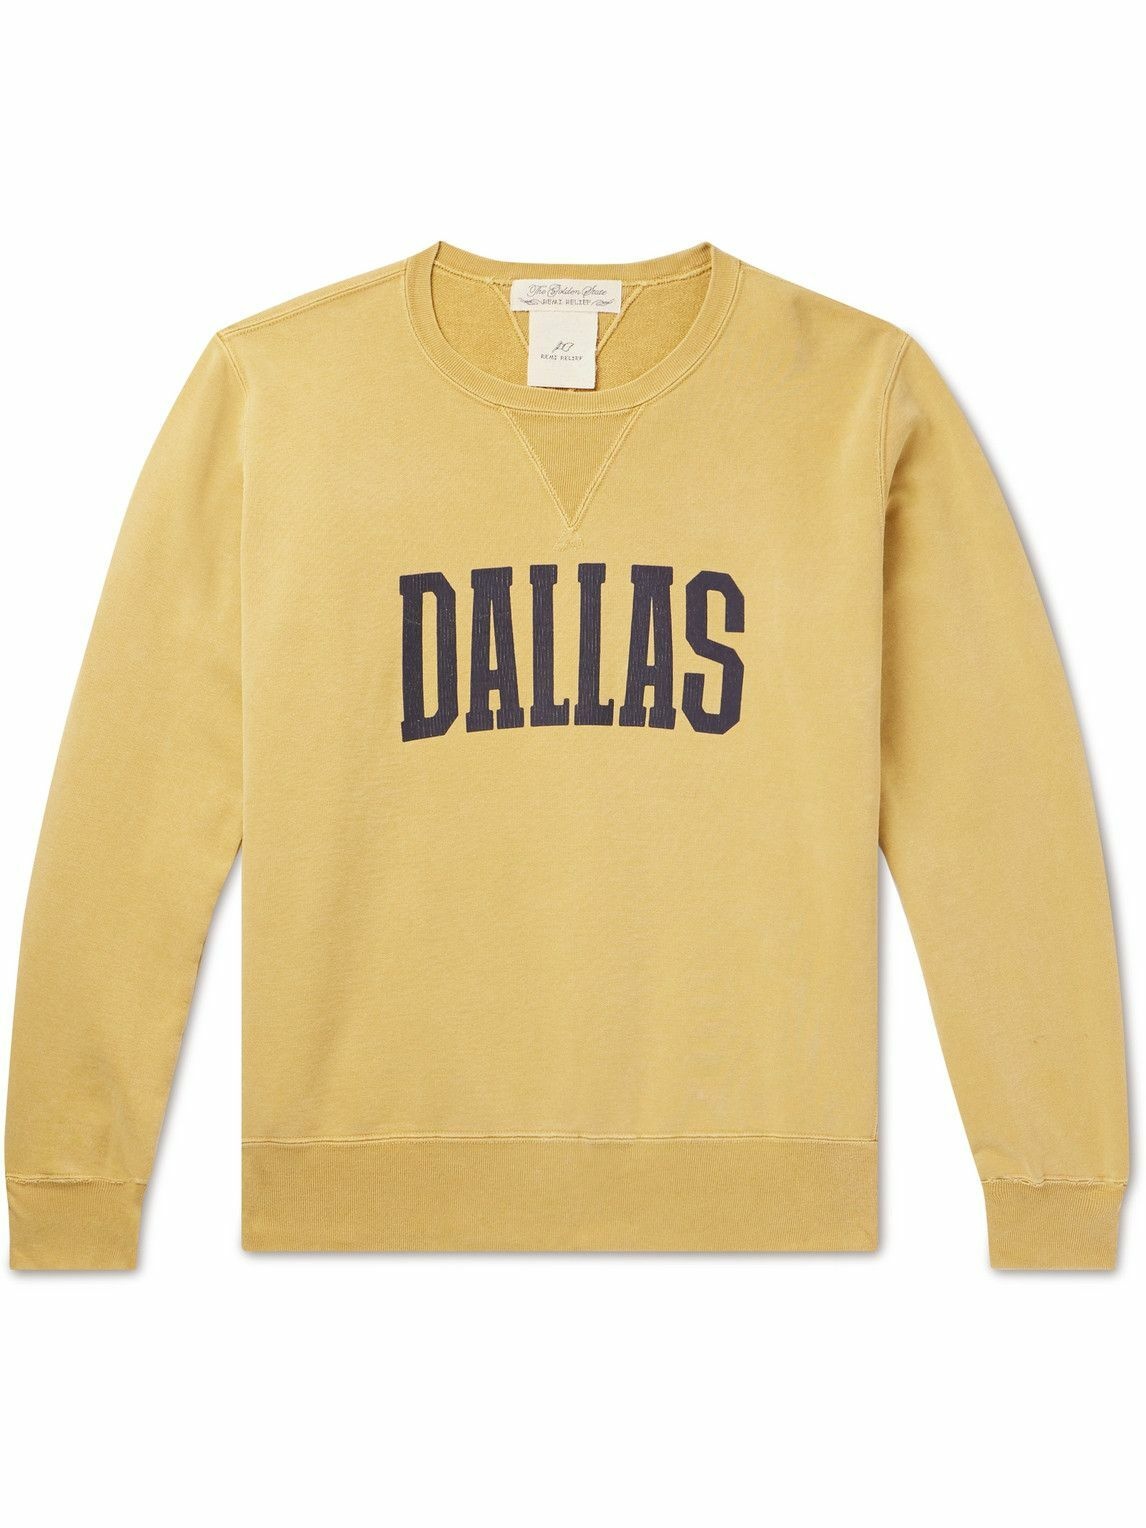 Remi Relief - Distressed Printed Cotton-Jersey Sweatshirt - Yellow Remi ...